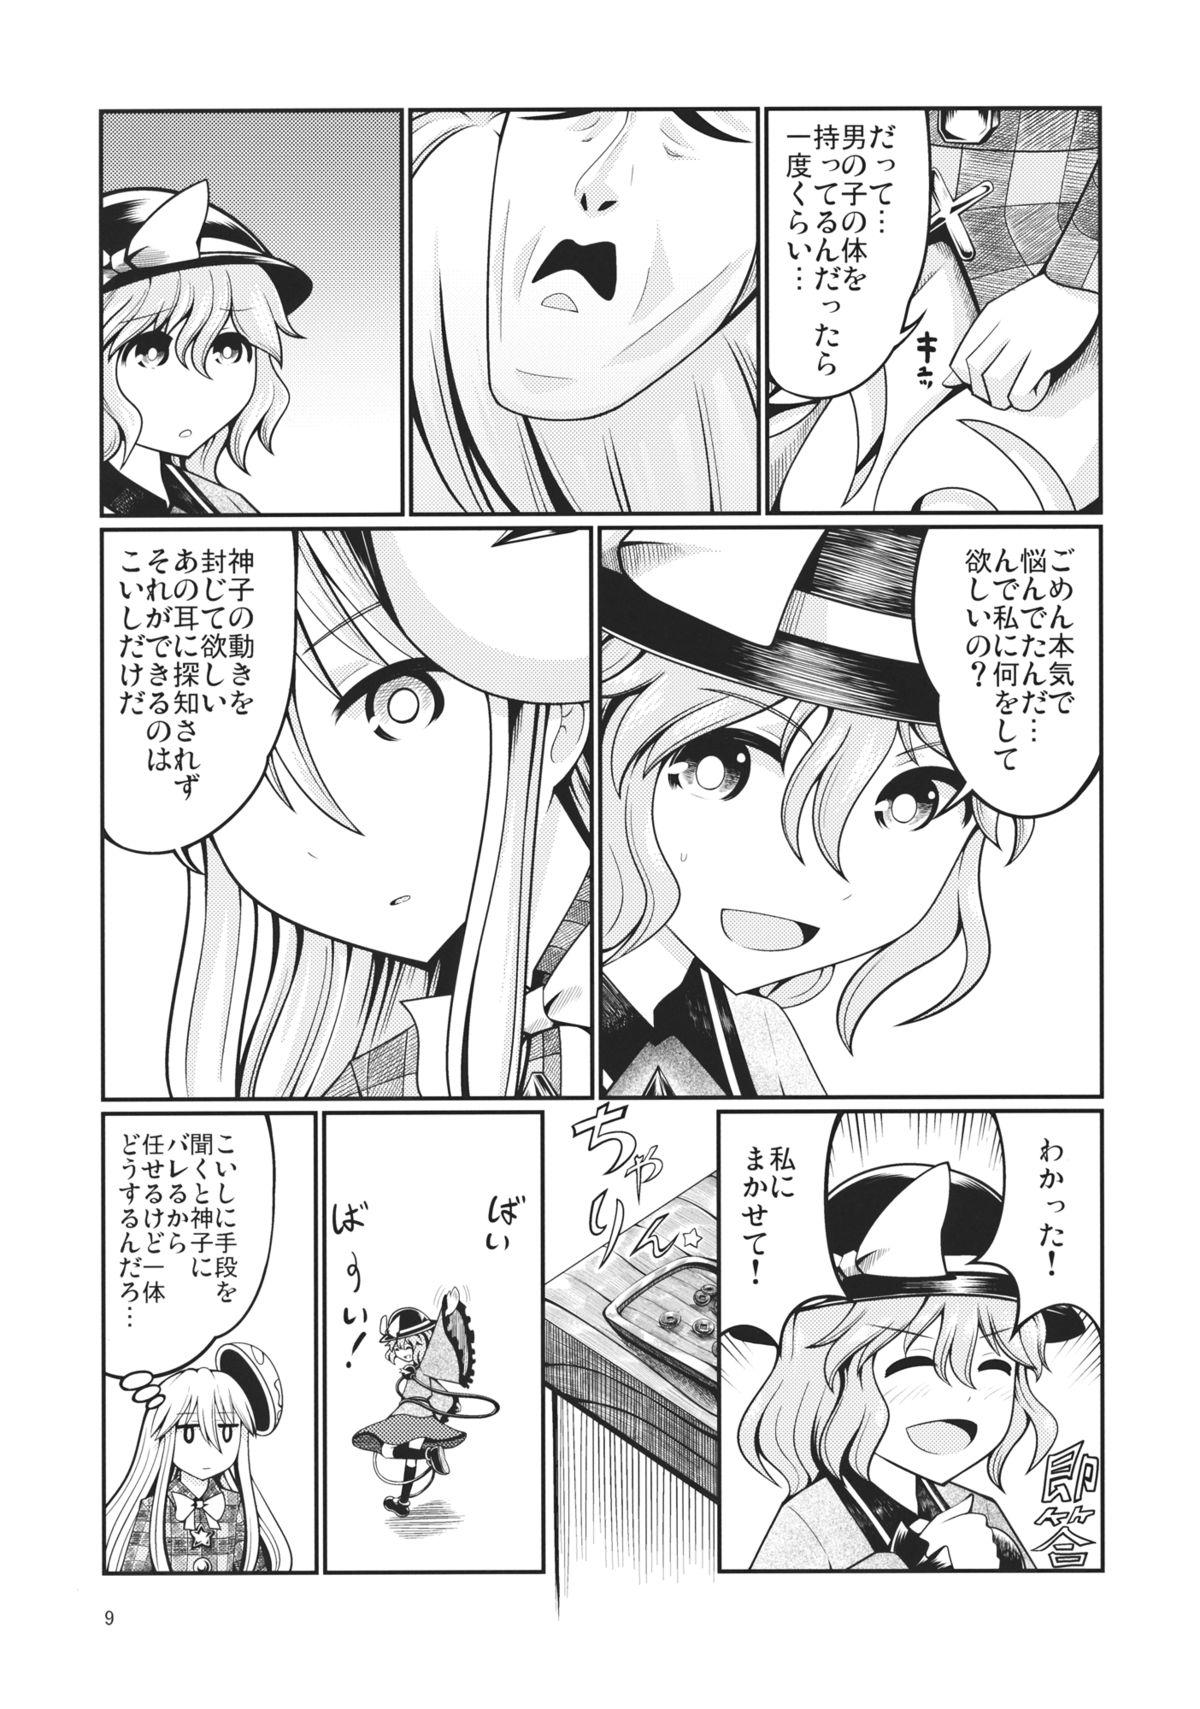 Monster Reverse Sexuality 3 - Touhou project Pornstar - Page 8